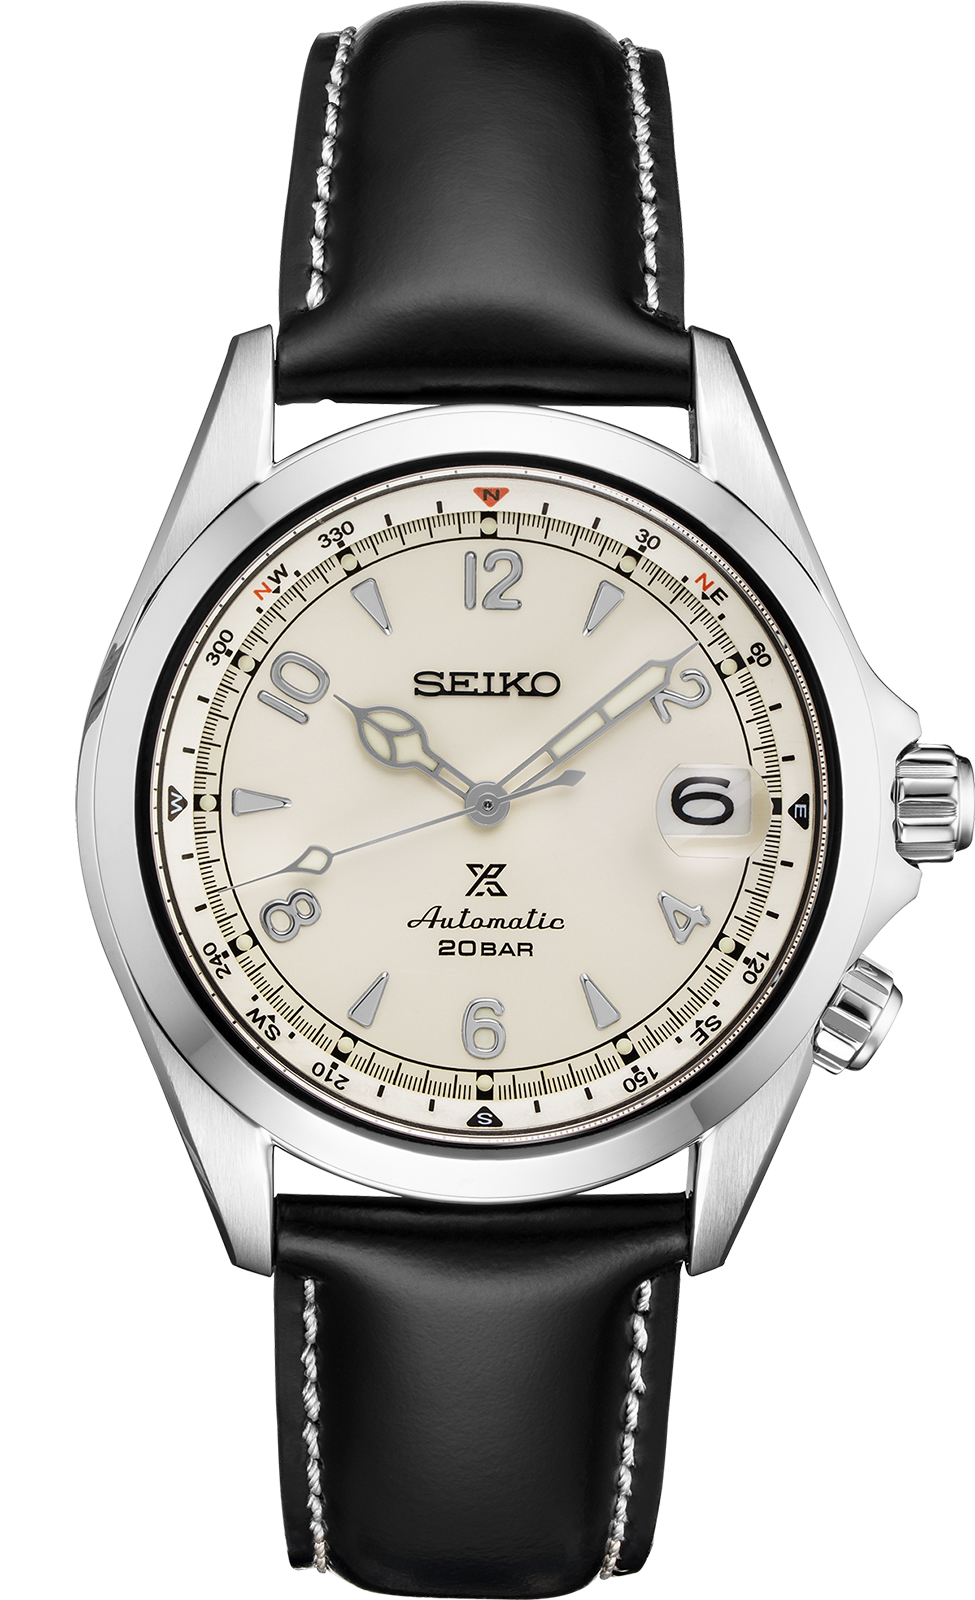 Seiko Adds Four New Alpinist-Inspired Watches To Prospex Line For 2020 |  aBlogtoWatch